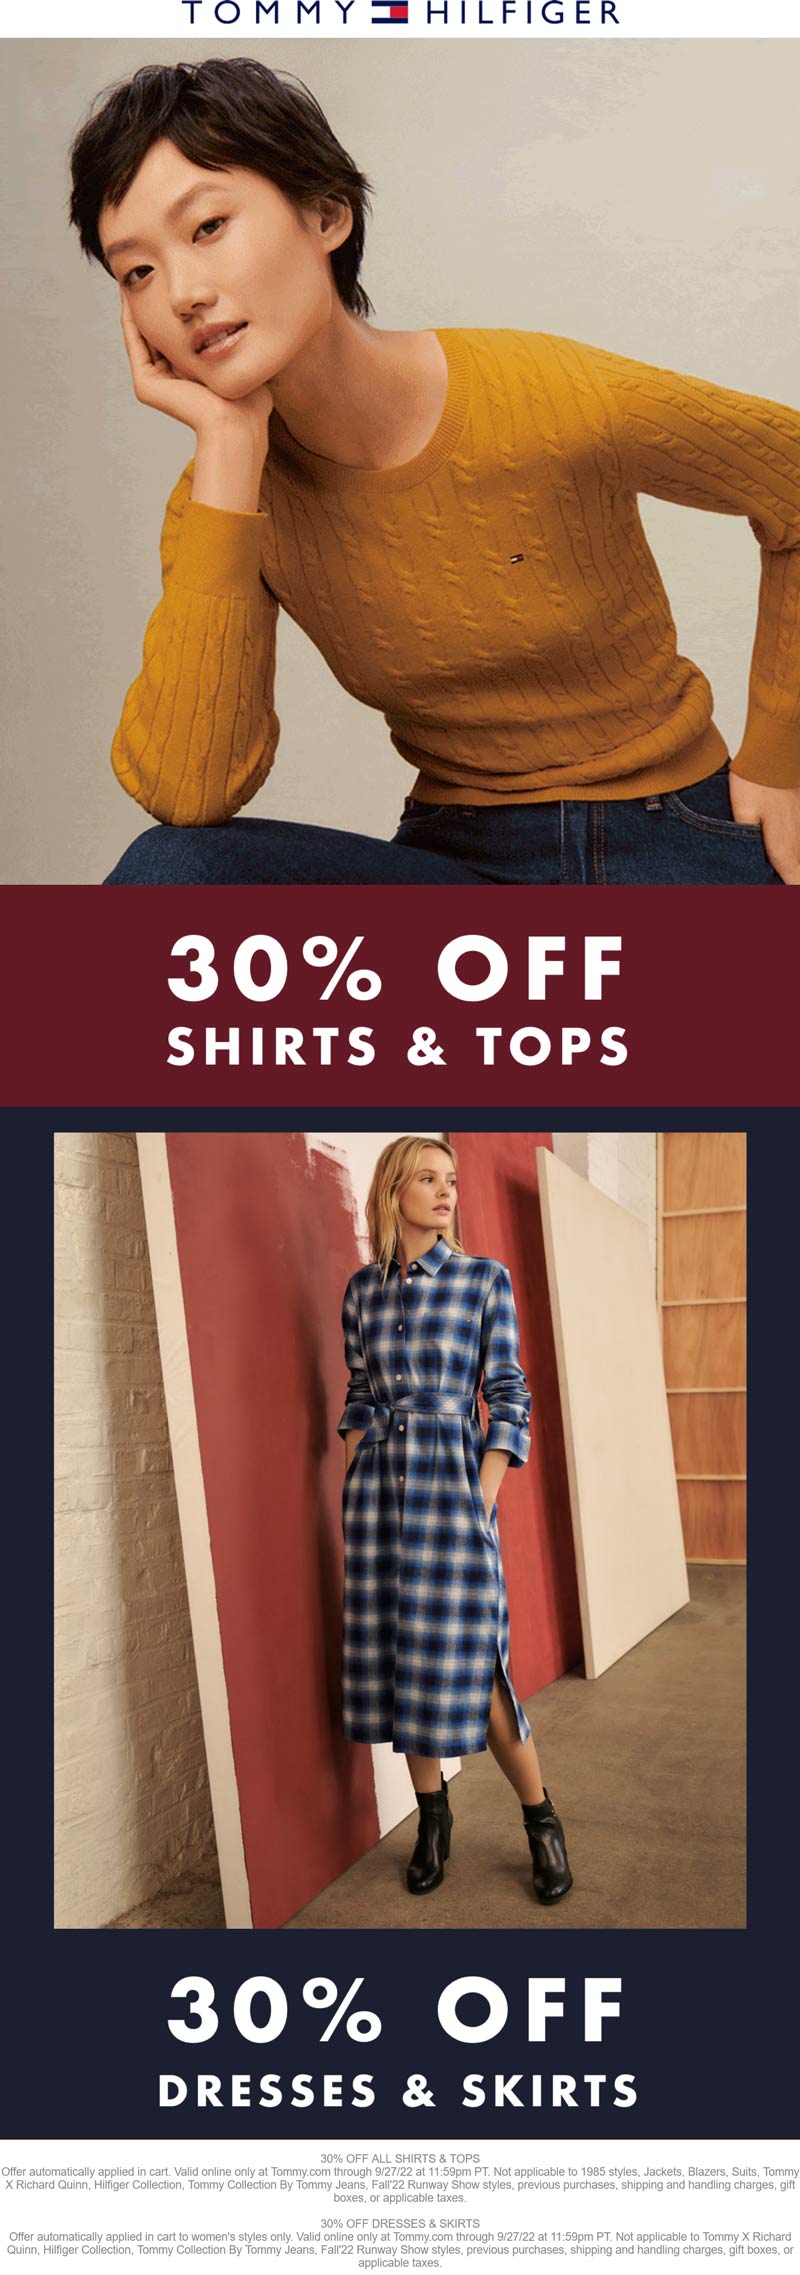 Tommy Hilfiger coupons & promo code for [December 2022]